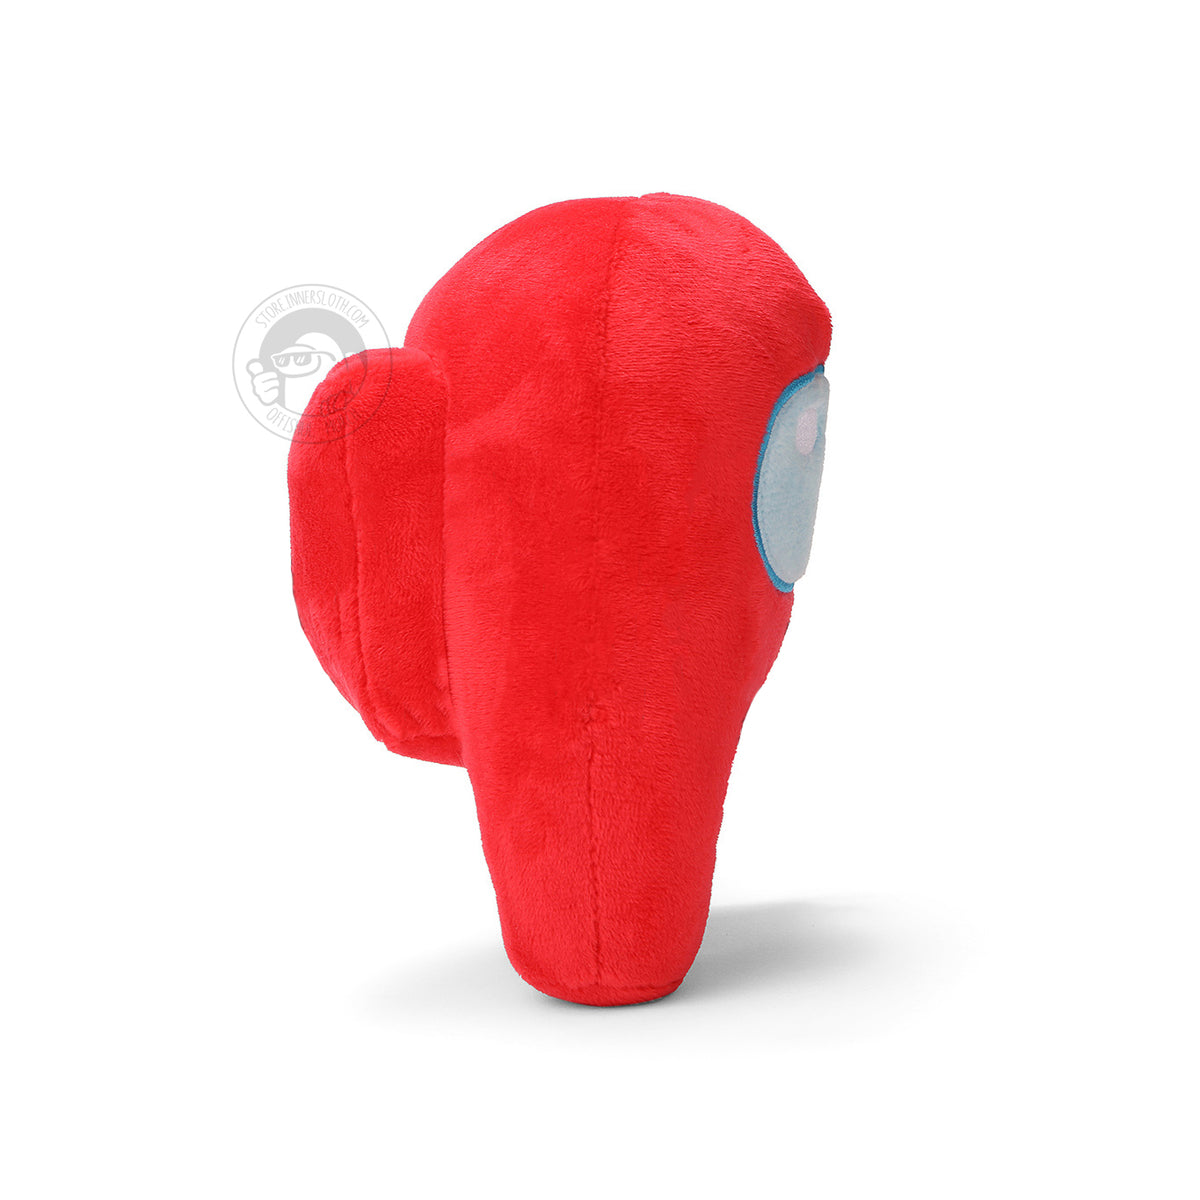 A product photo of the red Among Us: Crewmate Plush by Frisk Wolfie standing from the side.